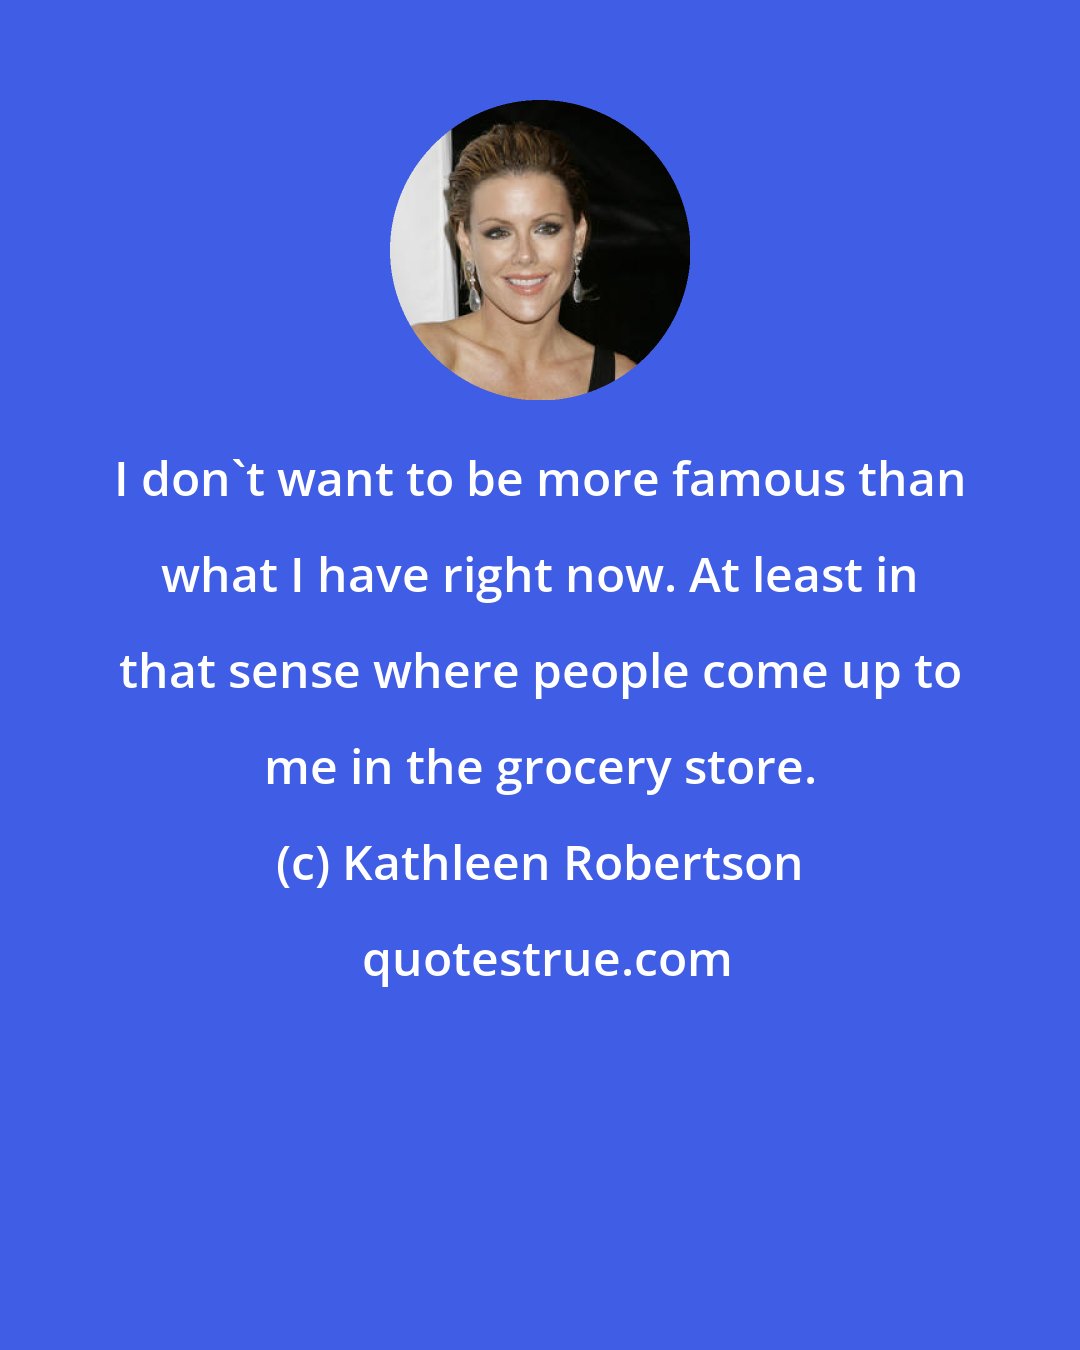 Kathleen Robertson: I don't want to be more famous than what I have right now. At least in that sense where people come up to me in the grocery store.